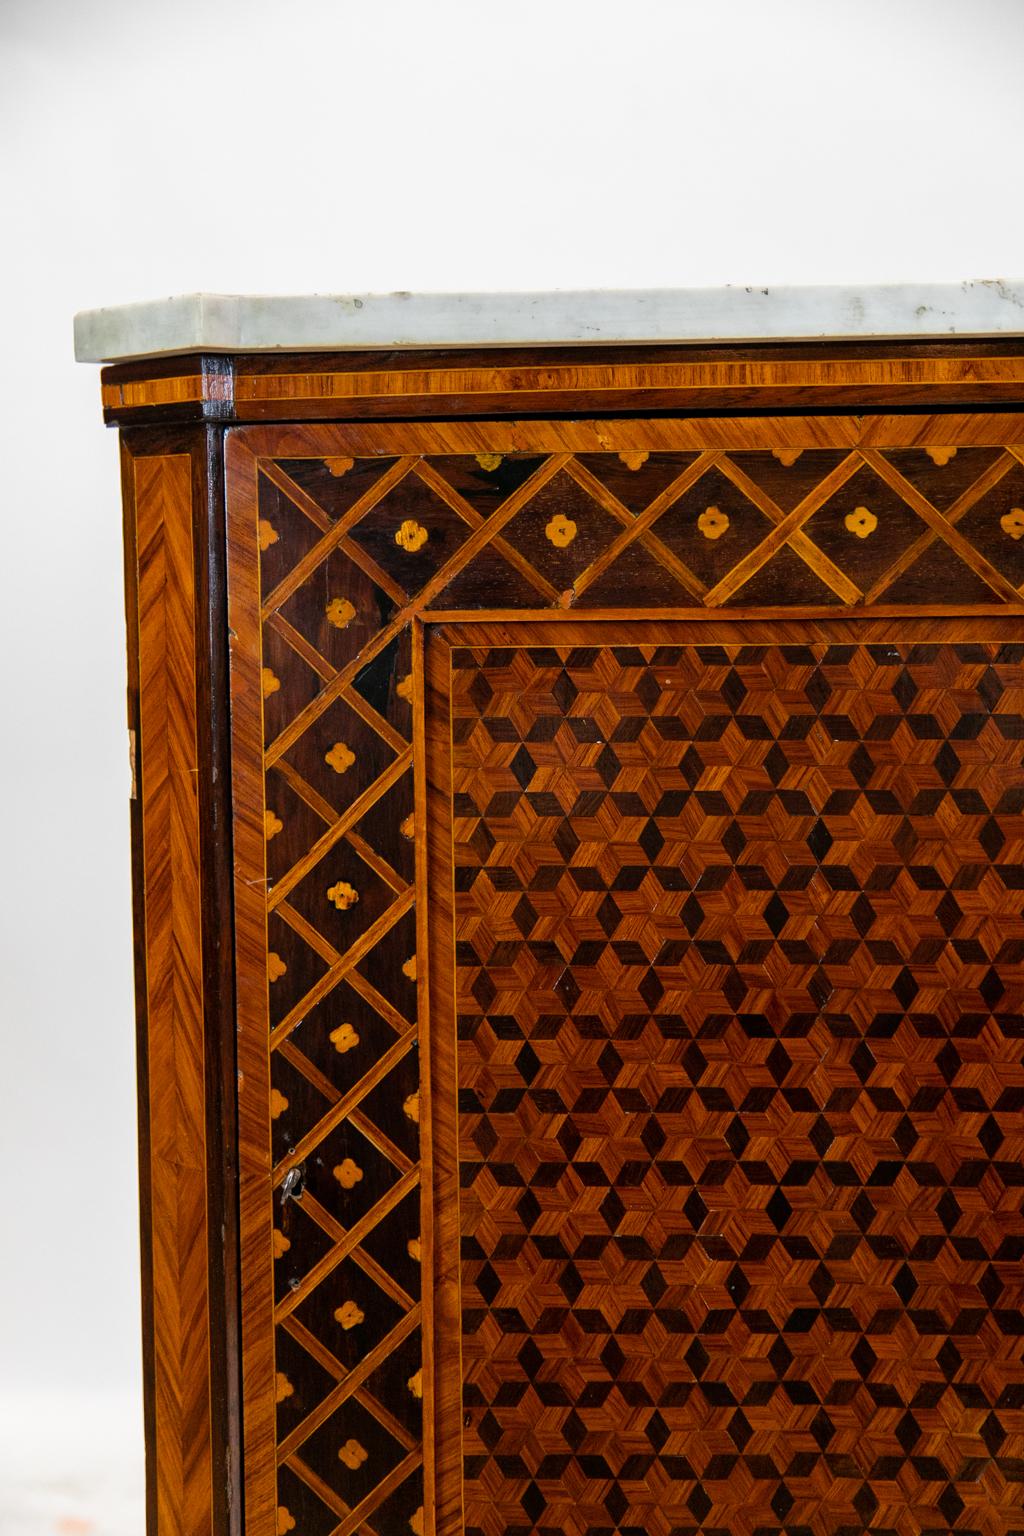 English marble-top inlaid corner cupboard, is inlaid with exotic woods. The door has a recessed panel inlaid in a square illusion pattern framed by rosewood, which is inlaid with stylized flowers and bindings in geometric patterns. The feet